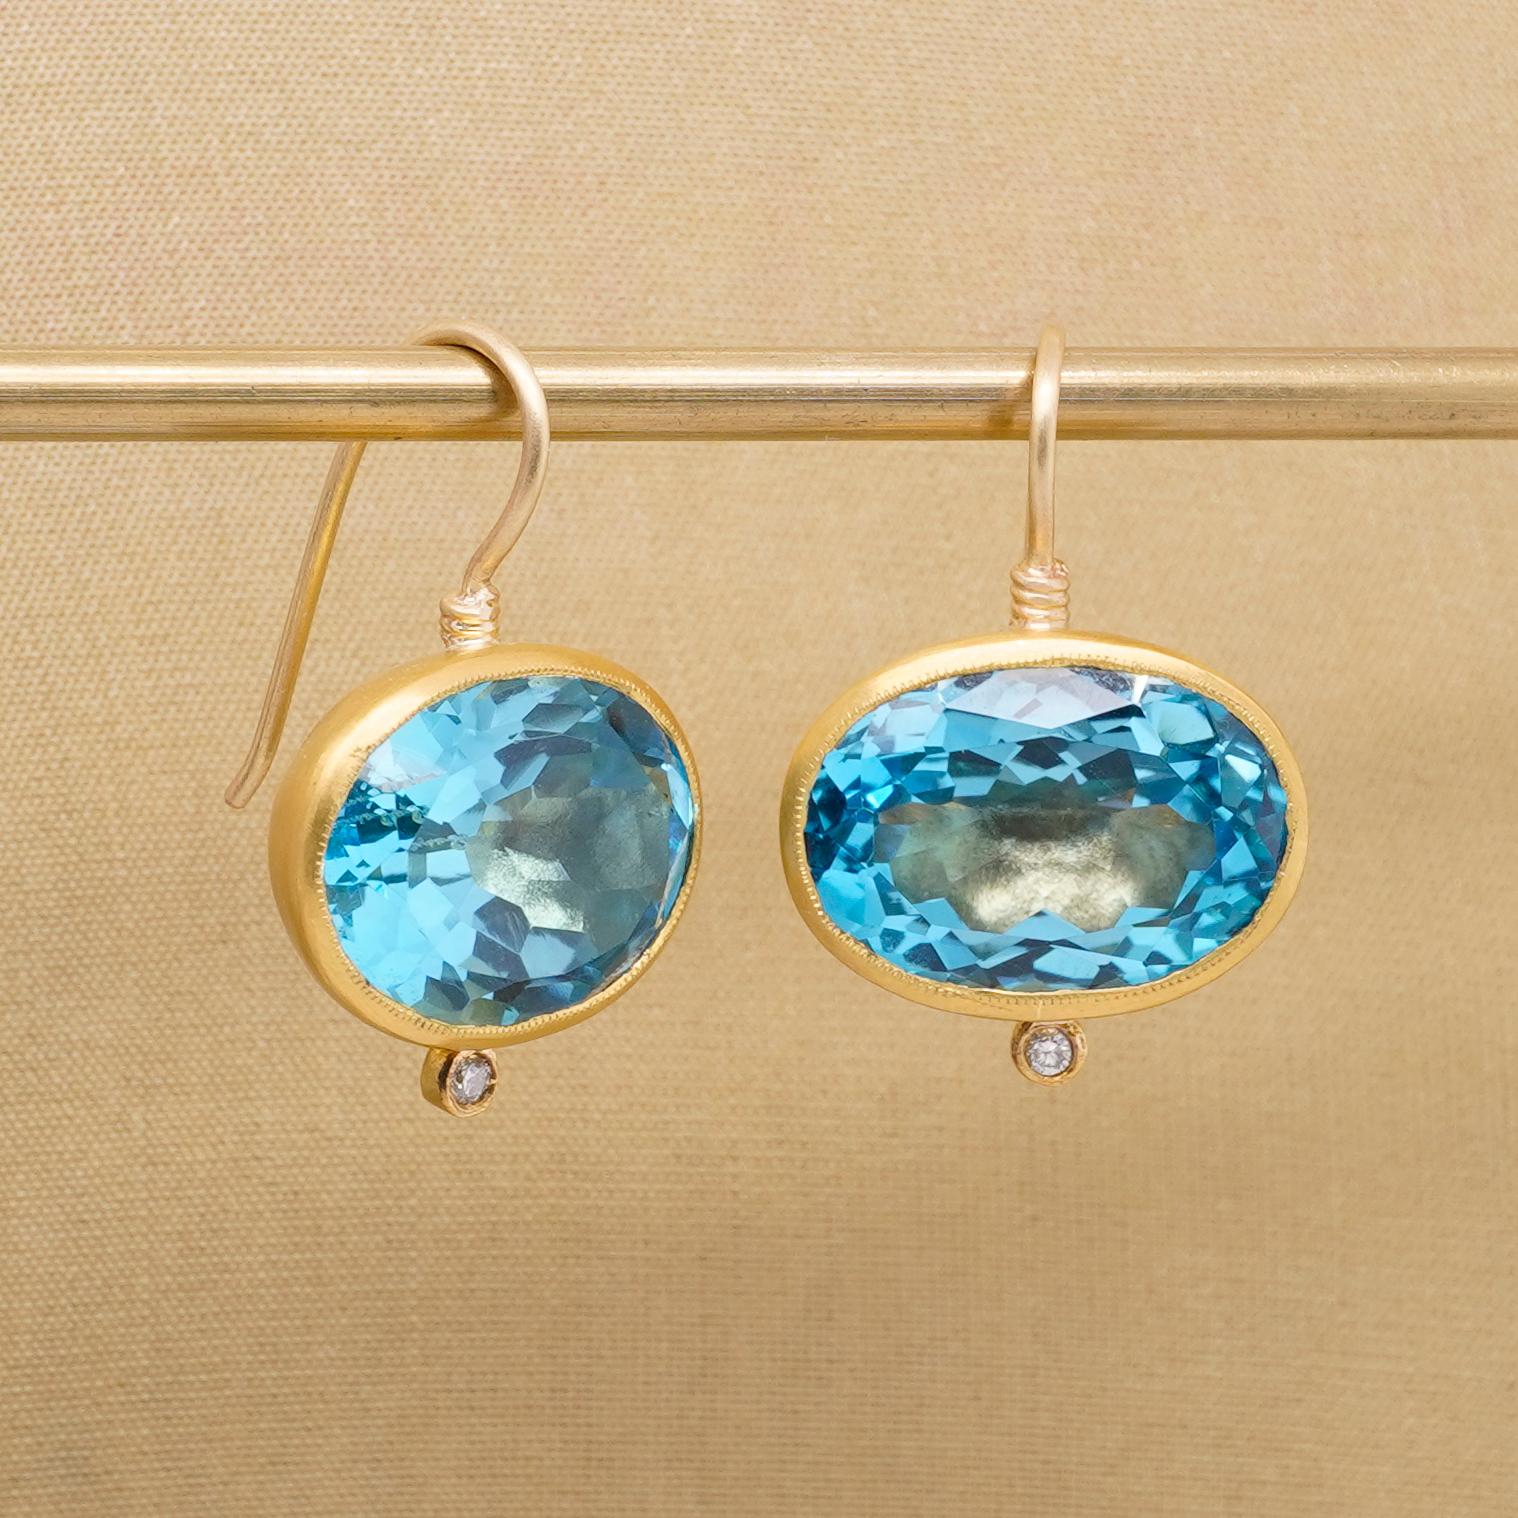 Artisan Large Bright, 22.15 Ct, Oval, Blue Topaz, Earrings with Diamond Detail, in 24kt For Sale